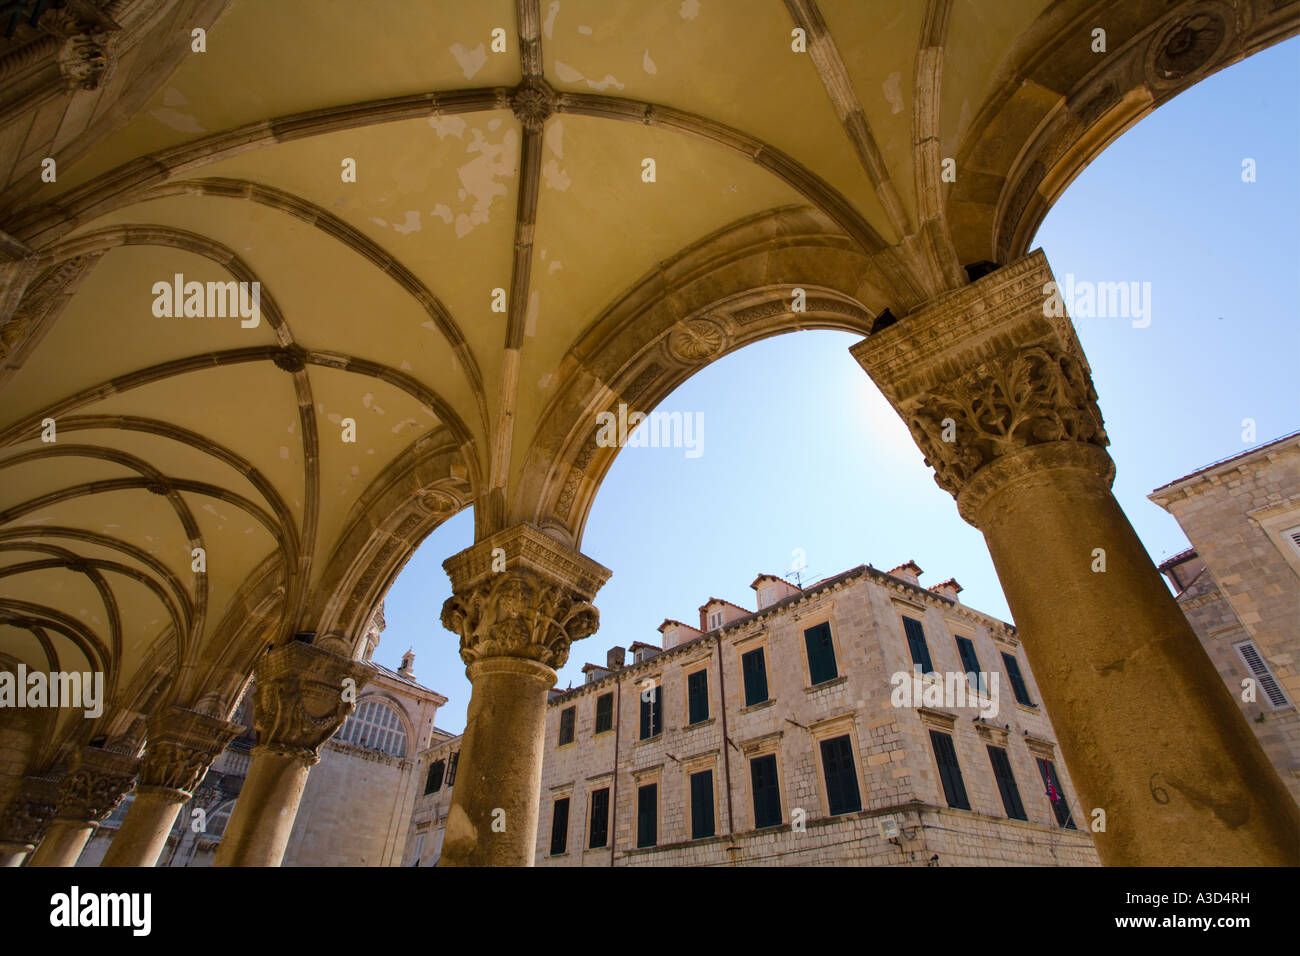 Traditional medieval architecture on Stradun street in Dubrovnik, Rector's Palace Stock Photo